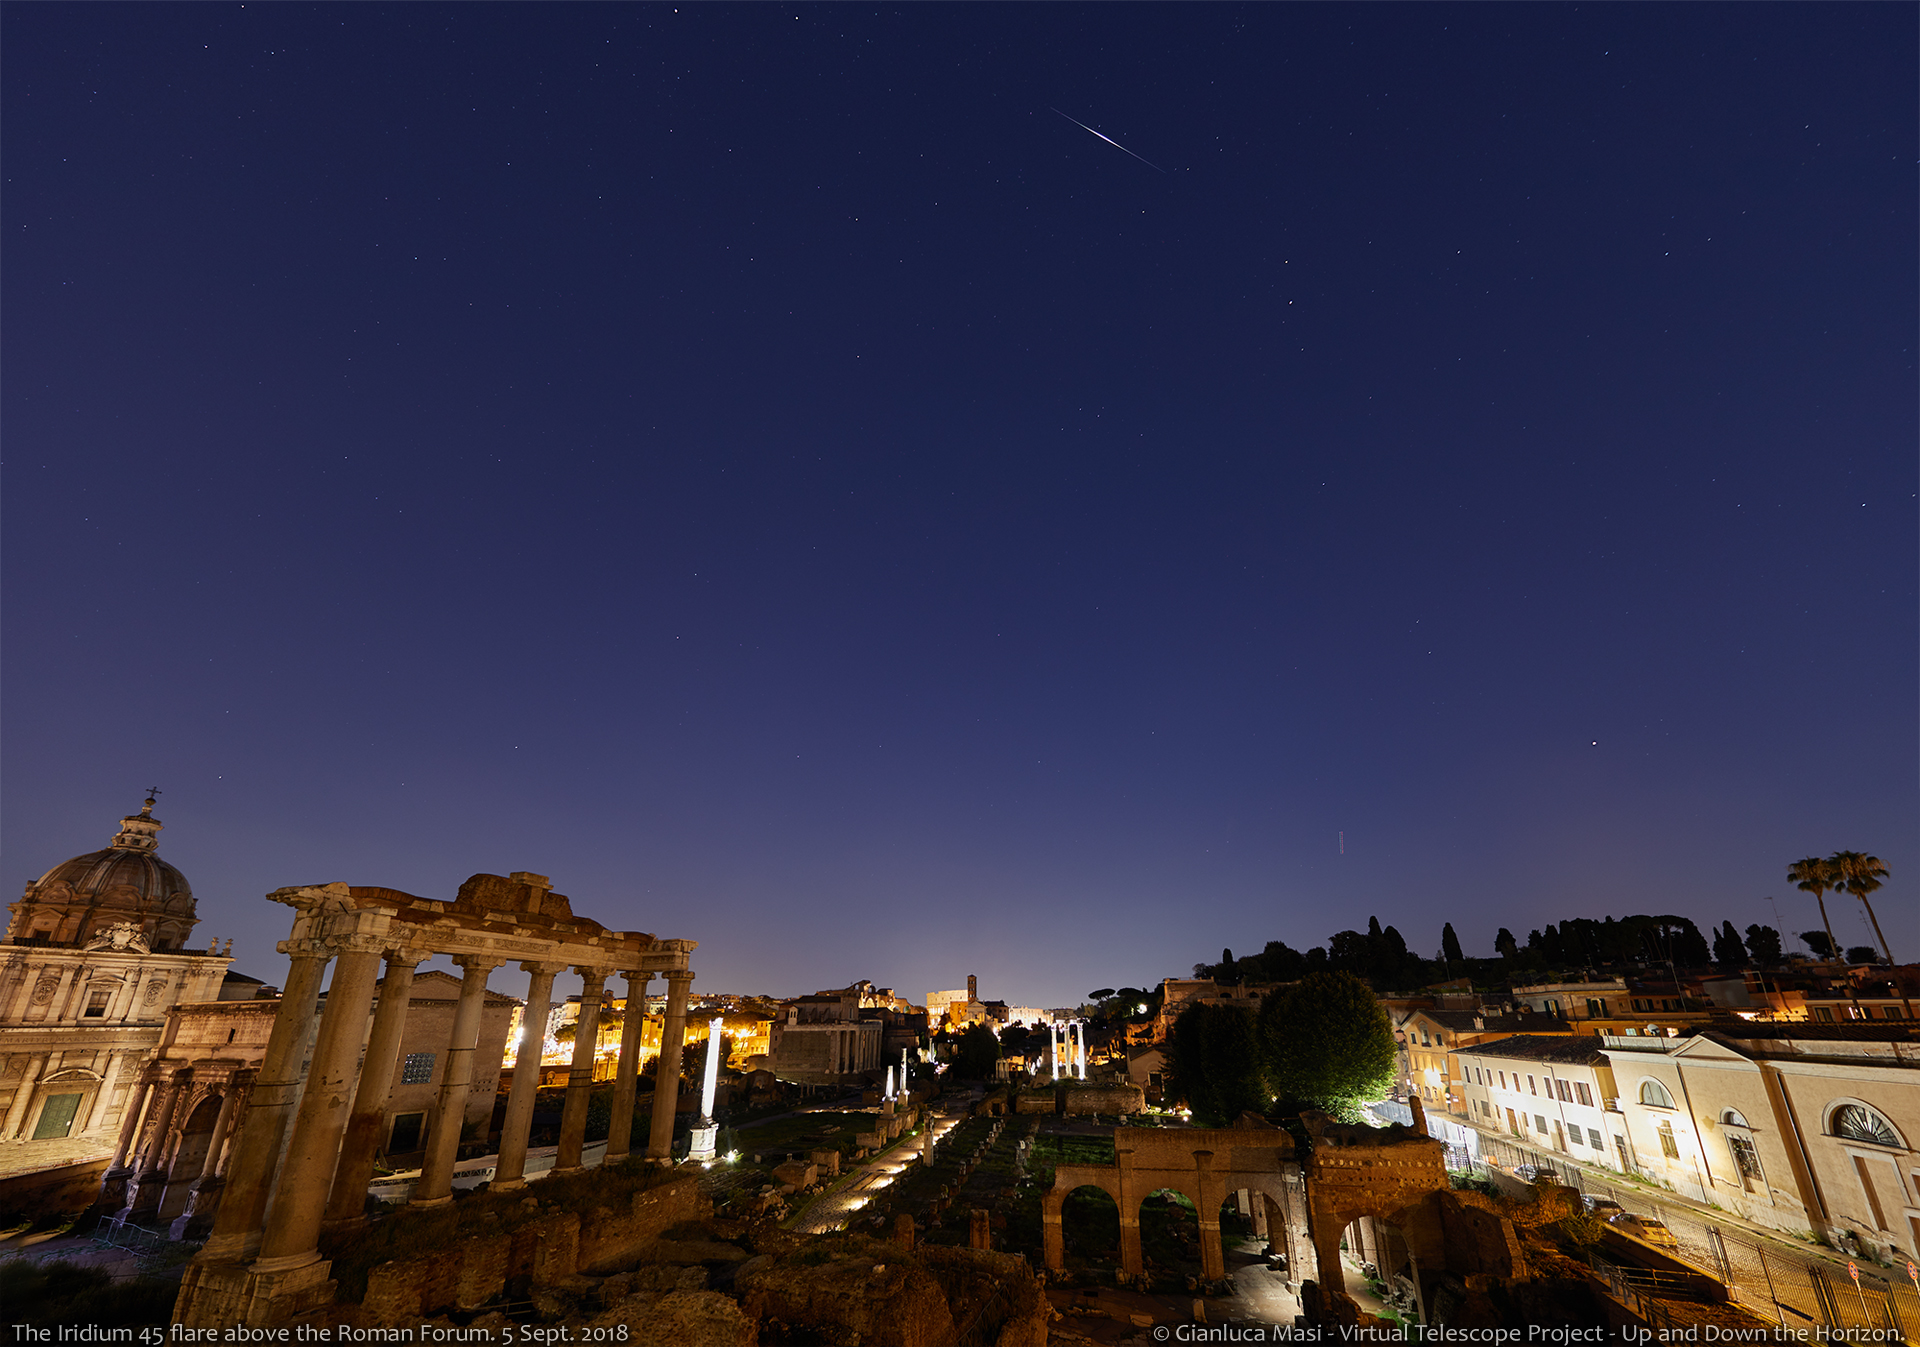 The Iridium 55 satellite flares as bright as mag. -7.5 above the Roman Forum and the Colosseum - 5 Sept. 2018